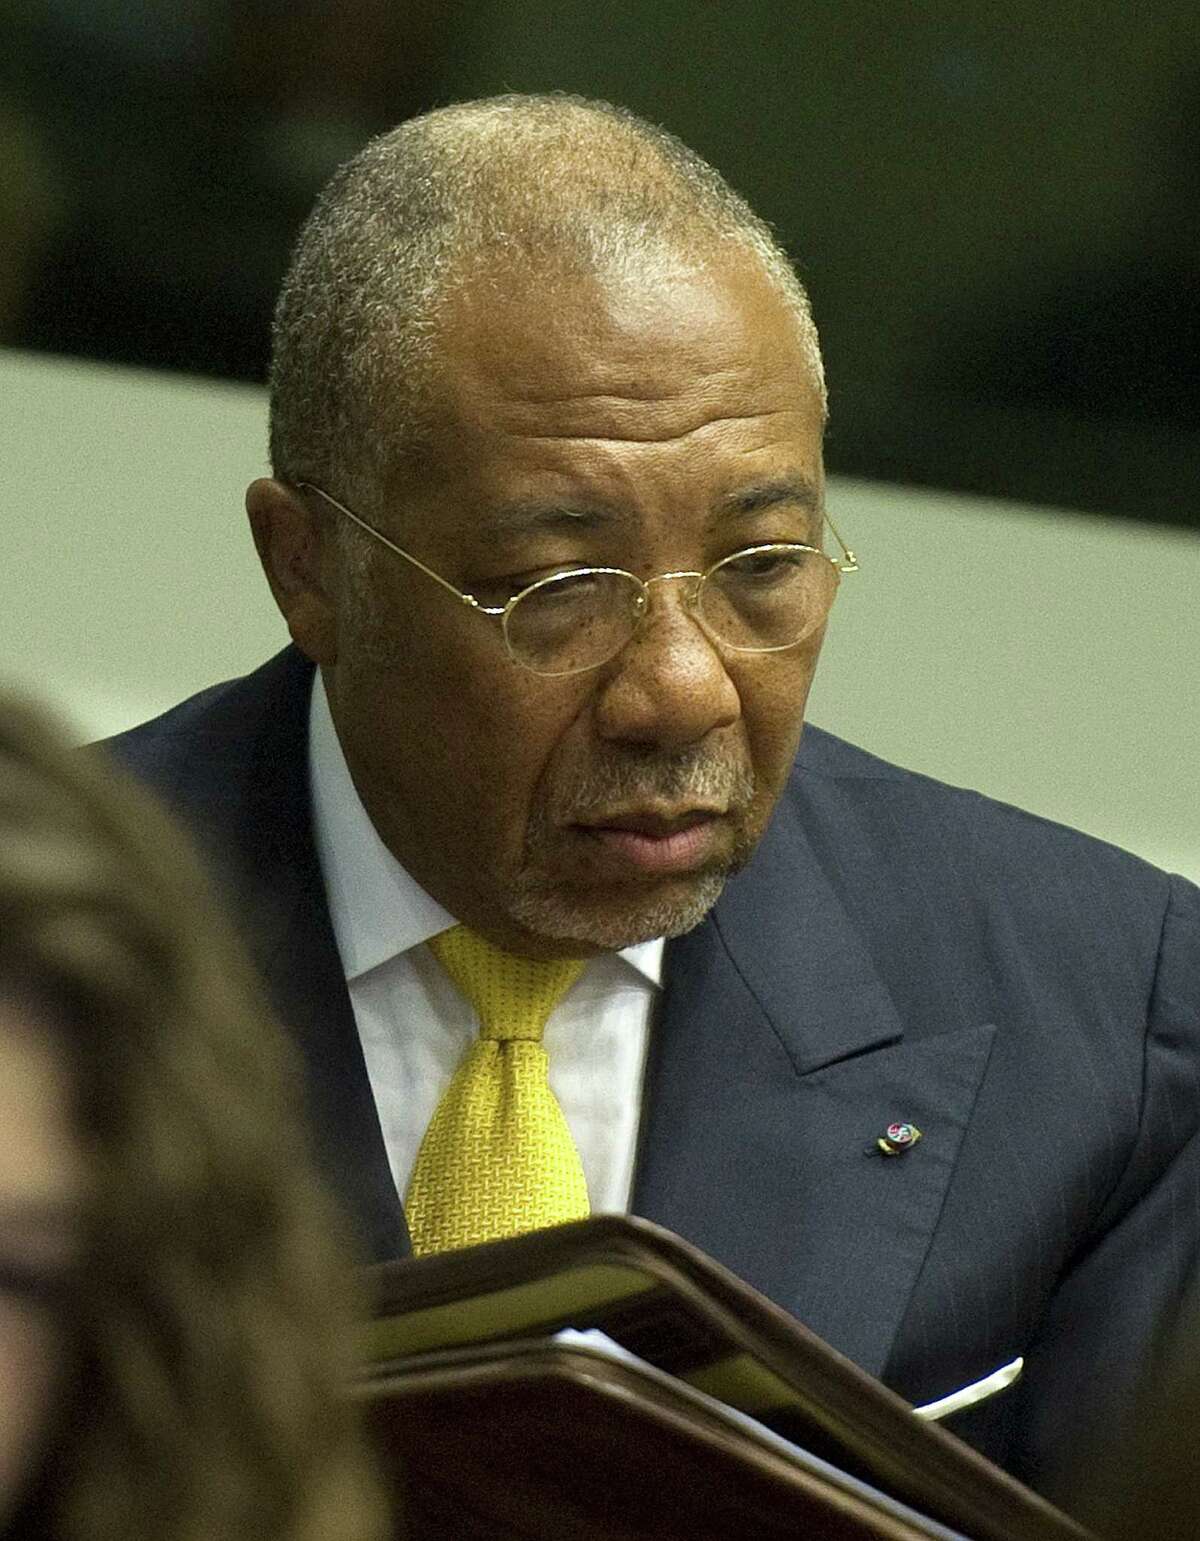 Liberian ex-president Charles Taylor, accused of arming Sierra Leone's rebels who paid him in "blood diamonds", listens to the judge at the opening of the sentencing judgement hearing at the court in Leidschendam, near The Hague, on 30 May 2012. Former Liberian president Charles Taylor will be sentenced for war crimes by a UN court on May 30, 2012 after being convicted for arming Sierra Leone rebels in return for "blood diamonds". Special Court for Sierra Leone judge Richard Lussick will deliver the ruling at a hearing due to start at 0900 GMT, the first sentence against a former head of state at an international court since the Nazi trials at Nuremberg in 1946. AFP PHOTO ANP / POOL/ TOUSSAINT KLUITERSTOUSSAINT KLUITERS/AFP/GettyImages